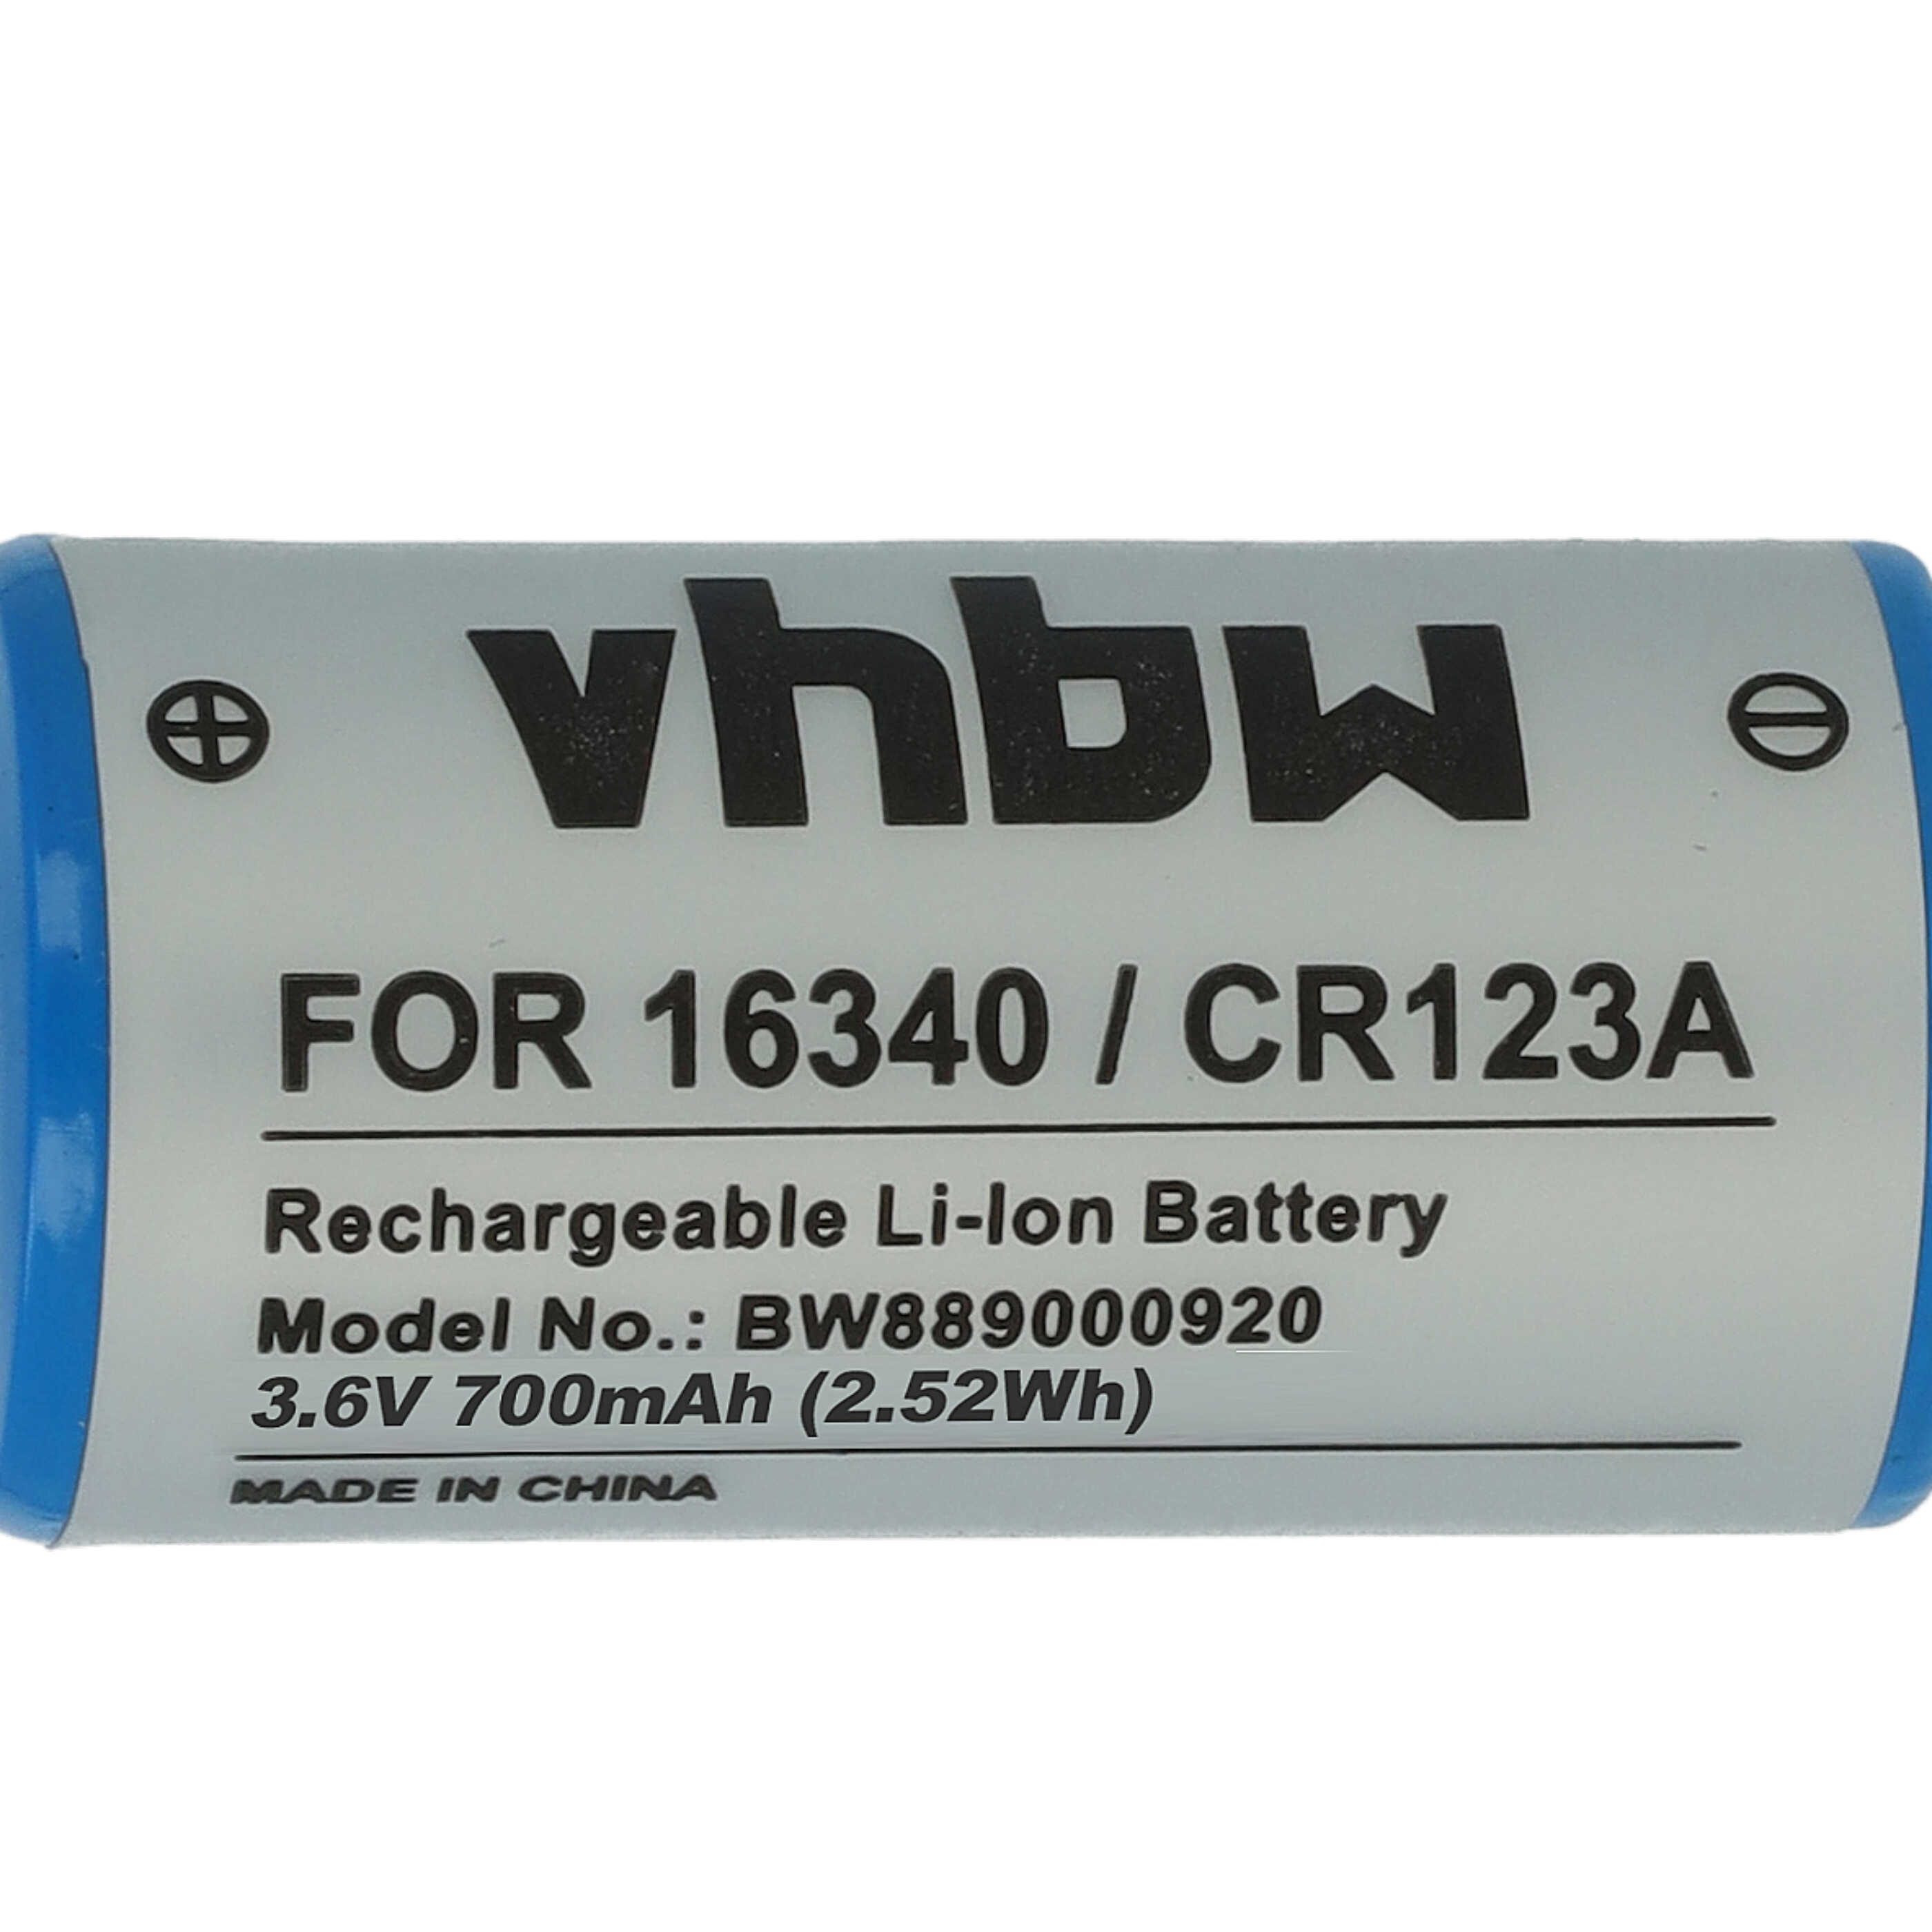 Battery (10 Units) Replacement for 16340, DL123A, CR123R, CR17335, CR17345, CR123A - 700mAh 3.6V Li-Ion